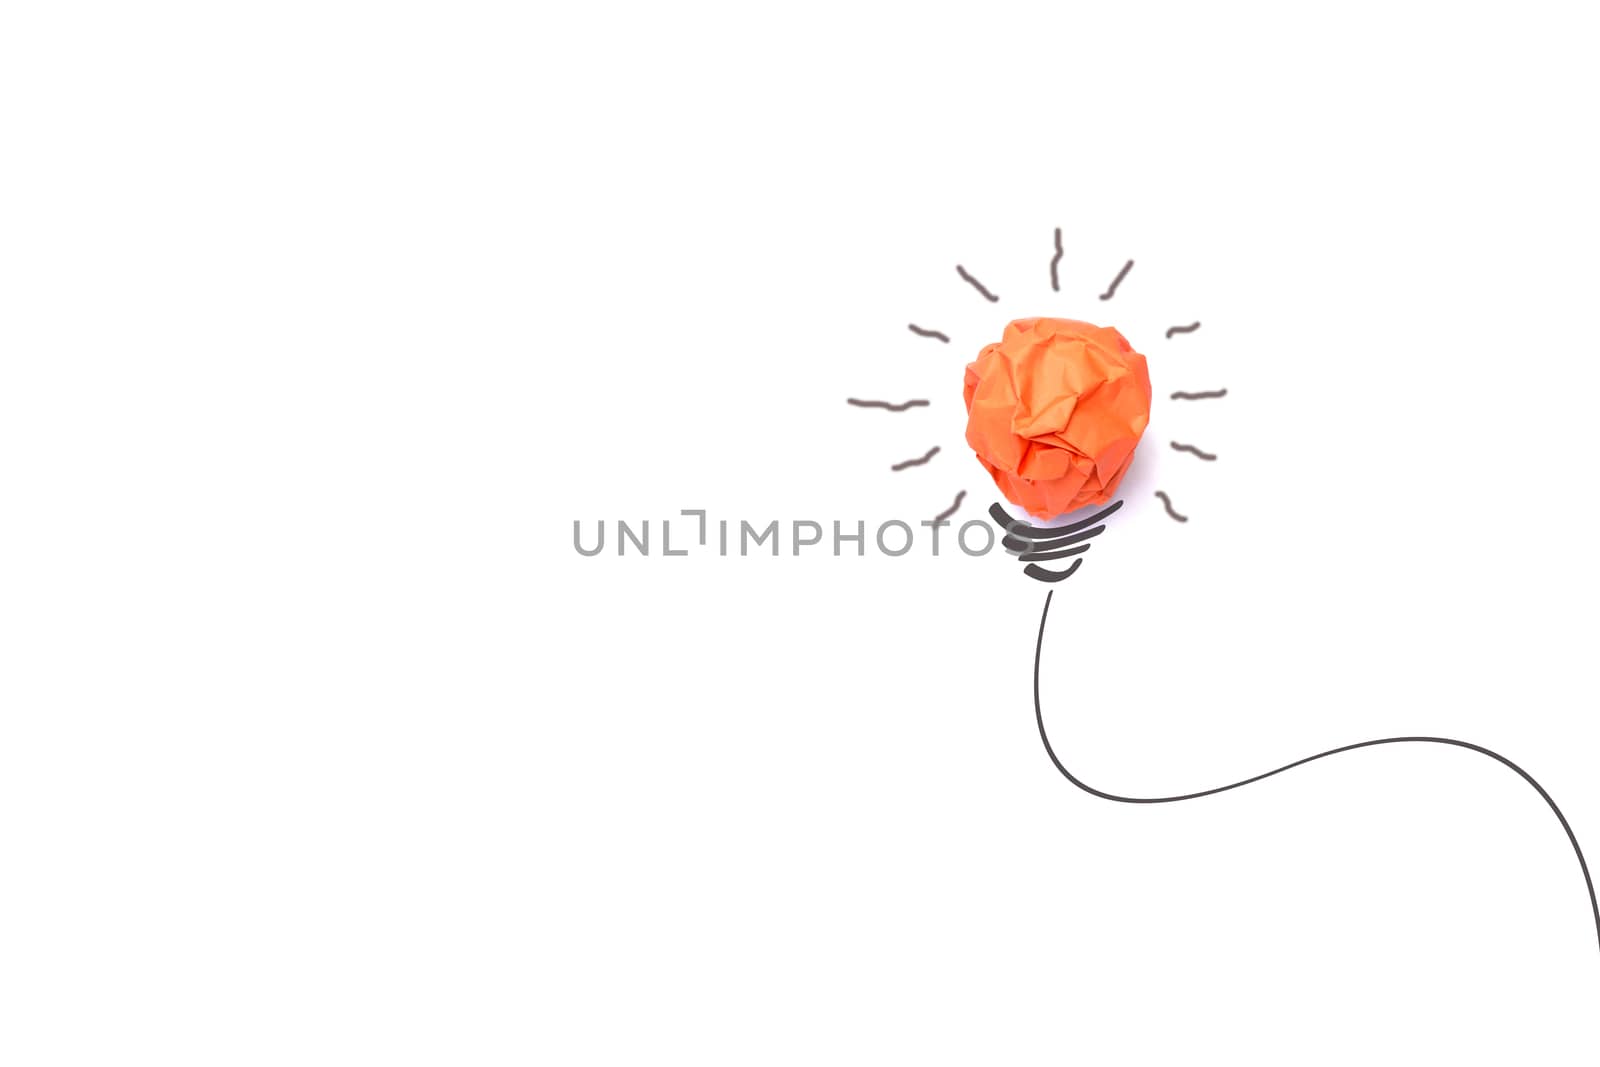 Concept idea with paper light bulb isolate on white background